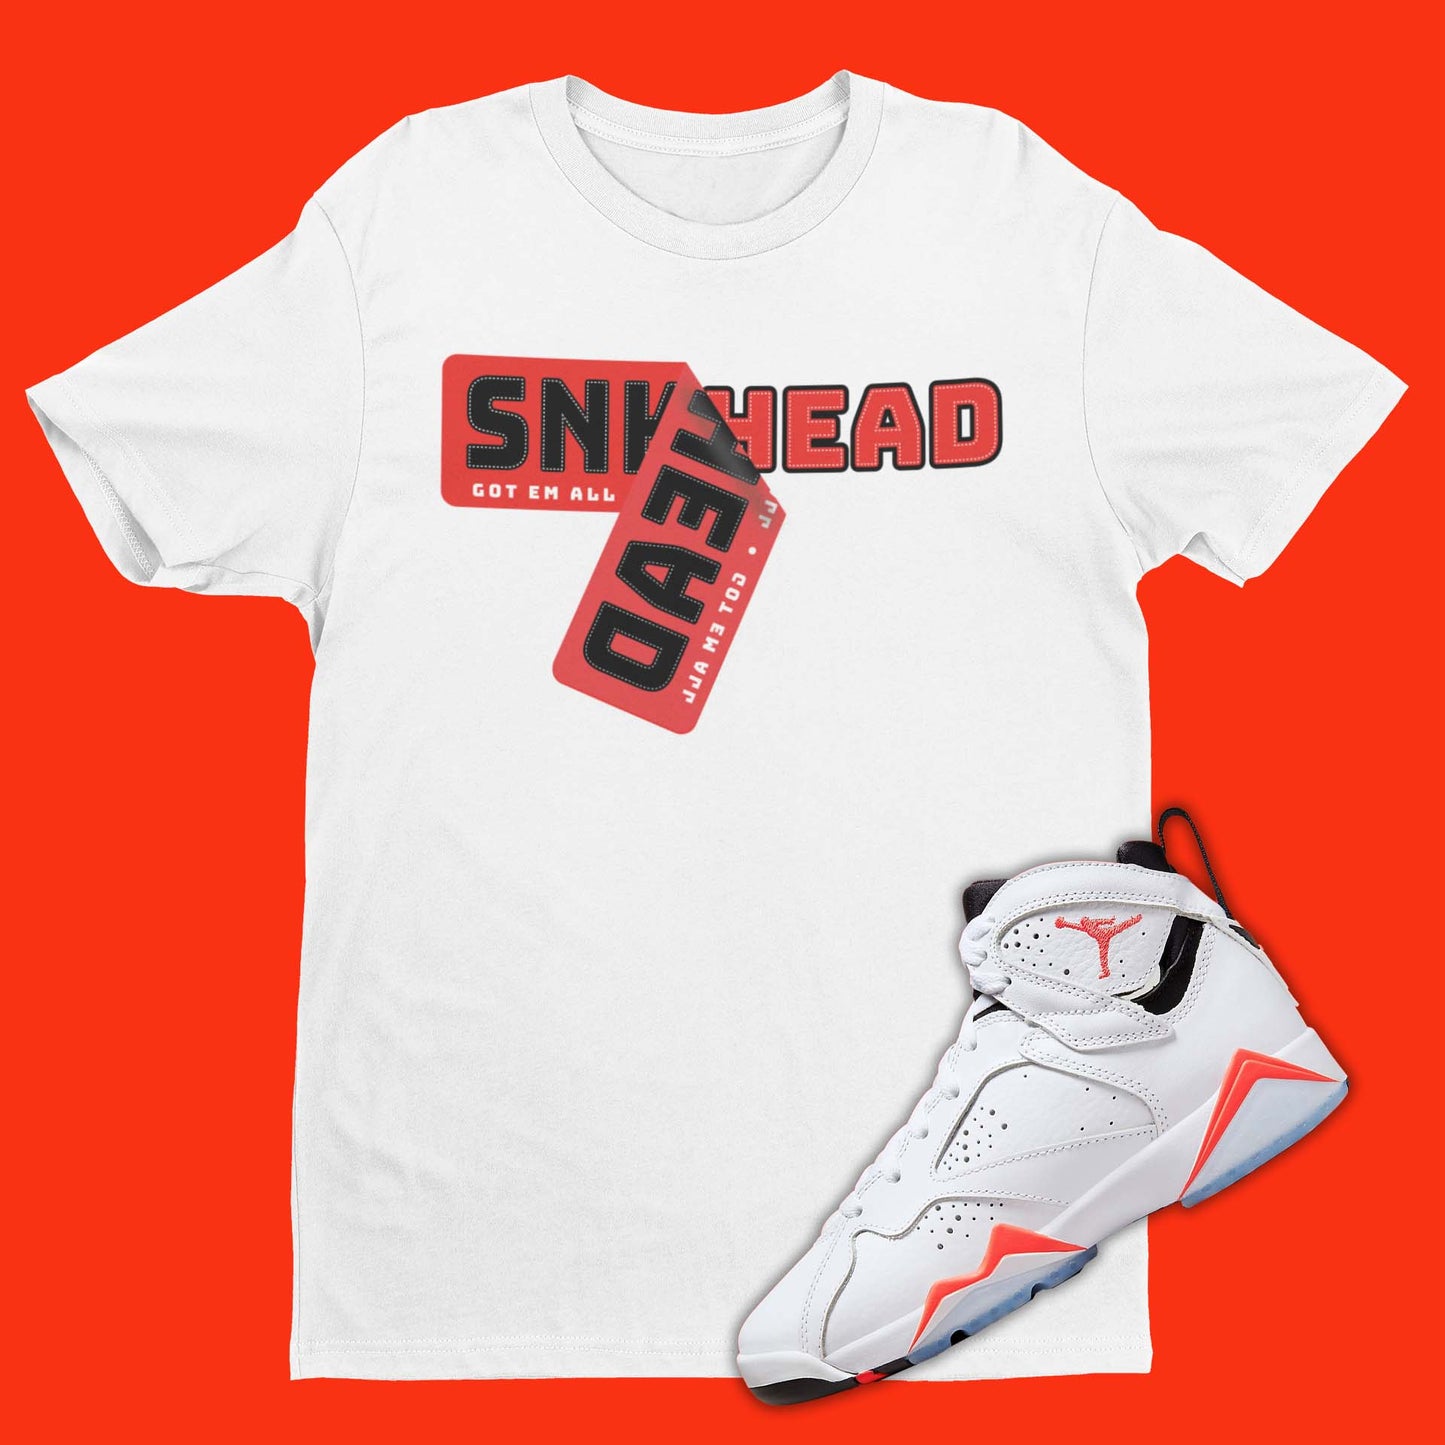 Sneakerhead Sticker Shirt Matching Air Jordan 7 White Infrared with sticker on the front